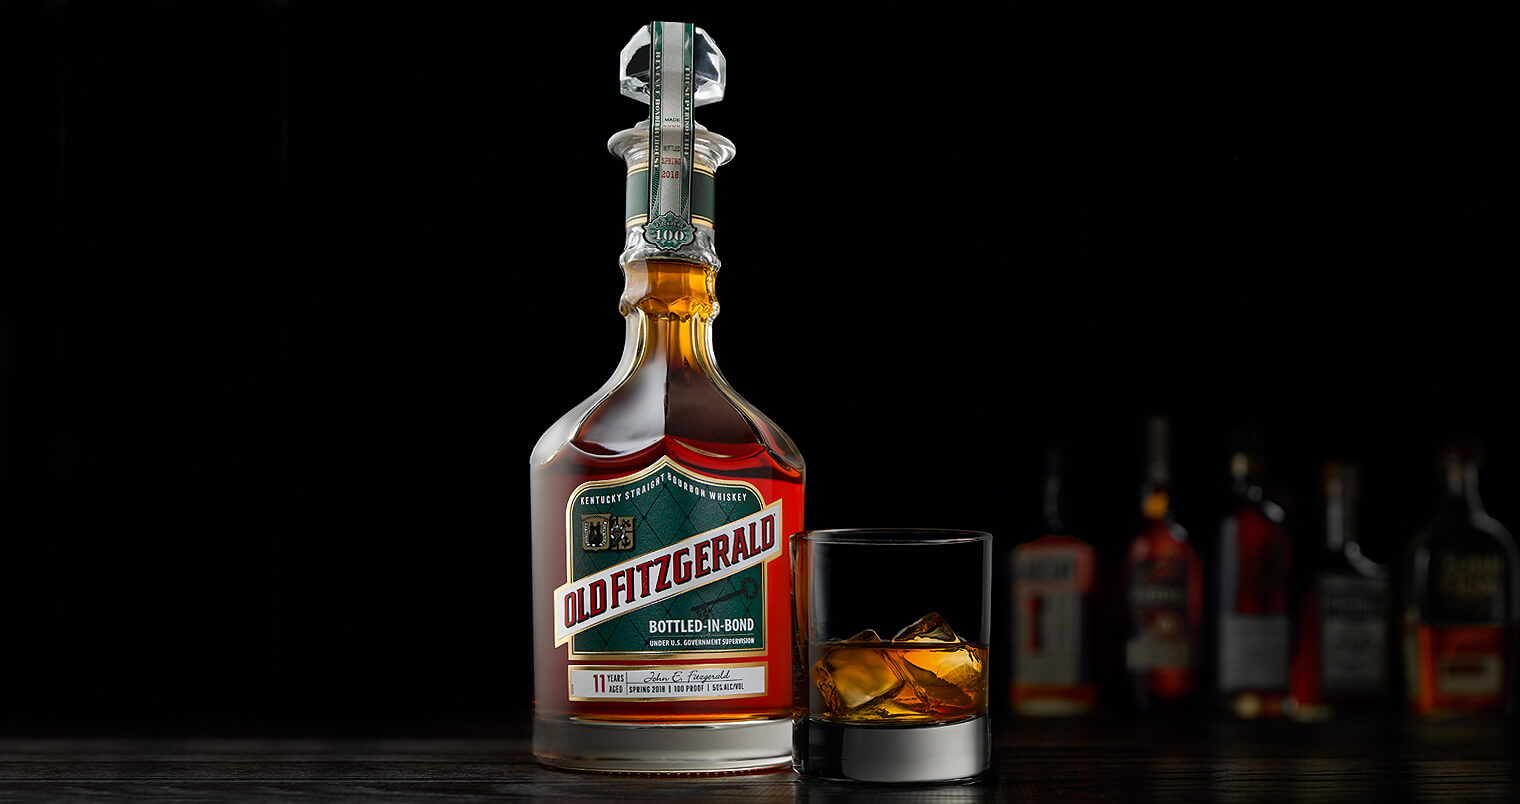 Fall 2018 Old Fitzgerald Bottled in Bond Series, bottle and glass on dark background, featured image